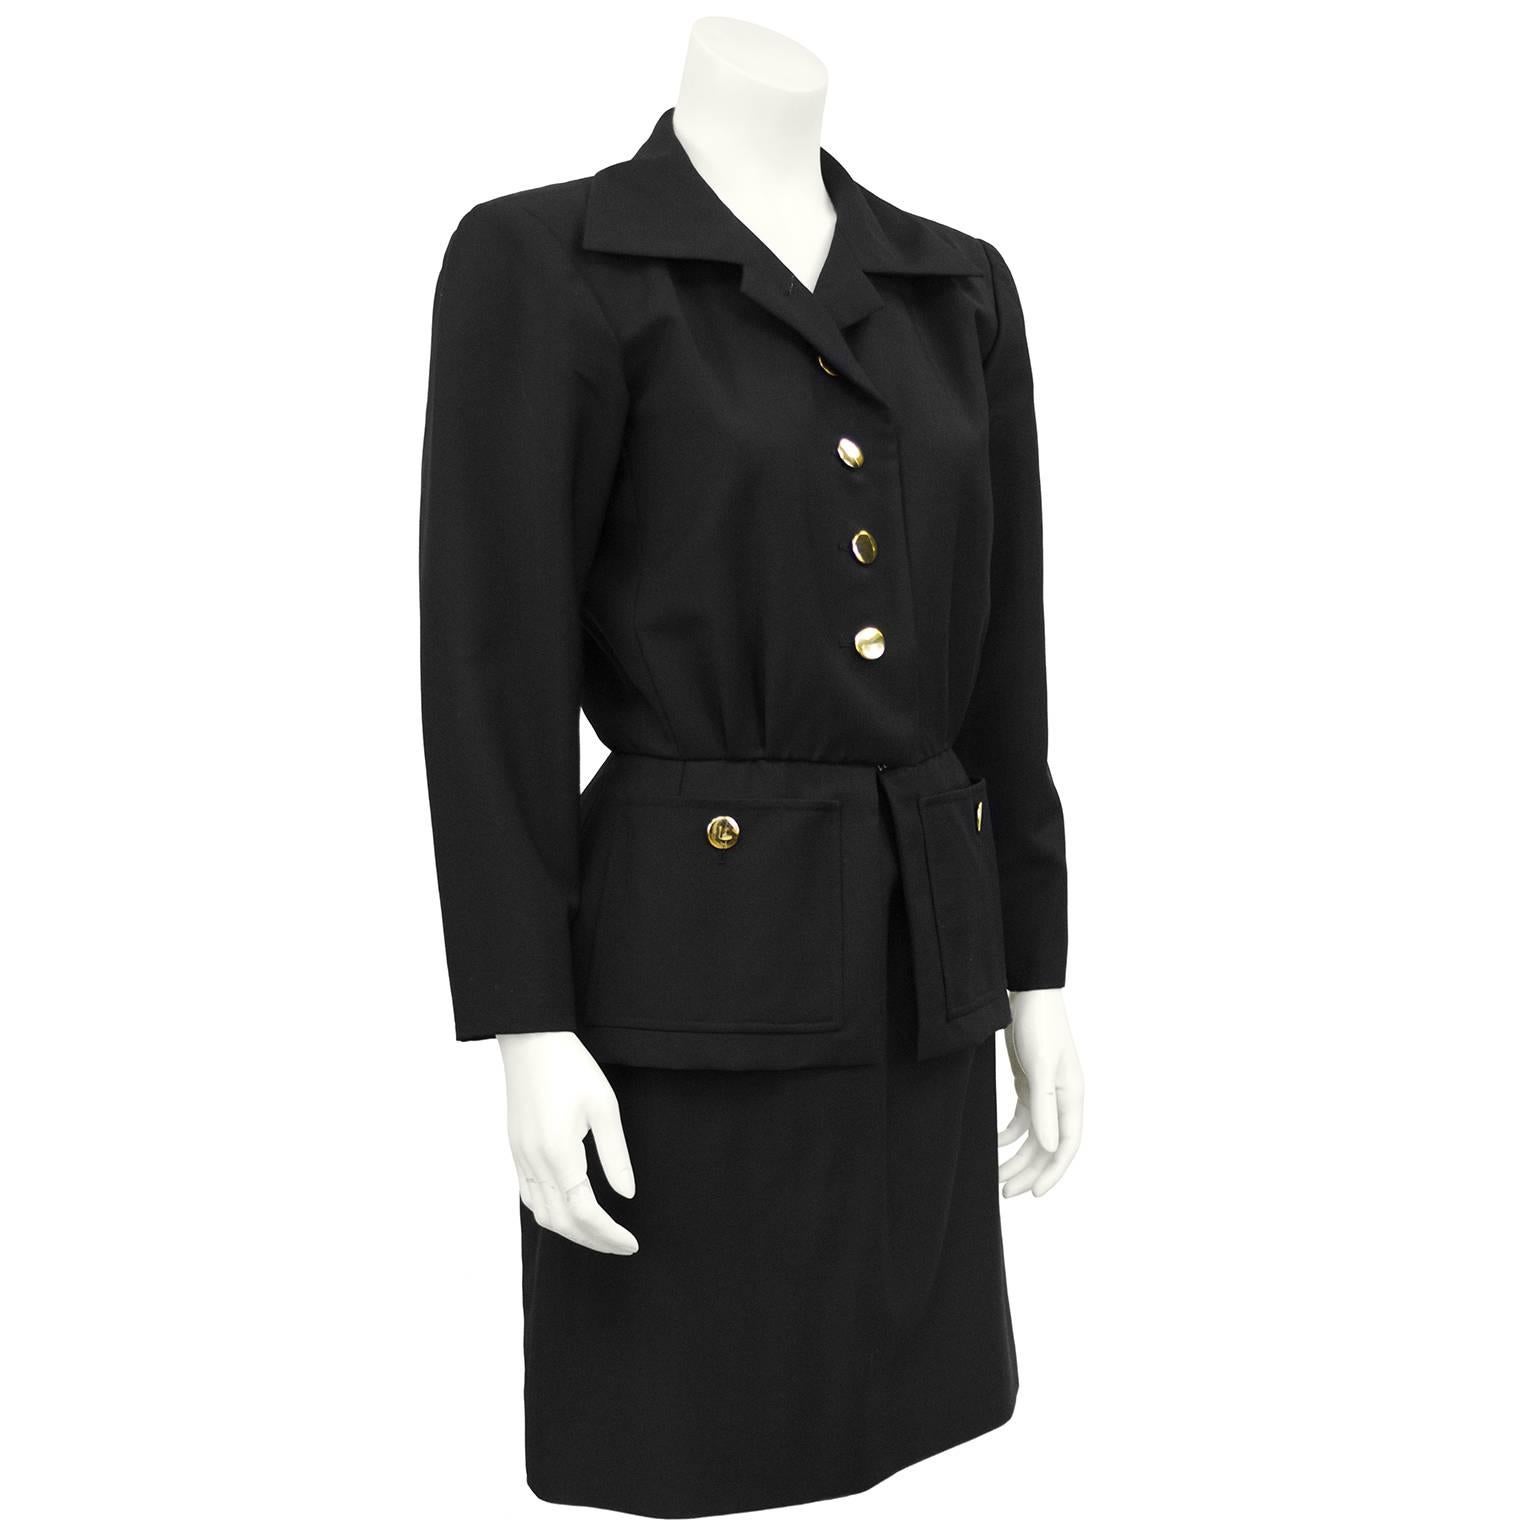 YSL/Yves Saint Laurent black wool gabardine skirt suit from the 1980s. Wide lapel has a small notch and the jacket has gold disc buttons down the front and a hidden flat hook at the waist. Fitted at the natural waist and finished with a slight